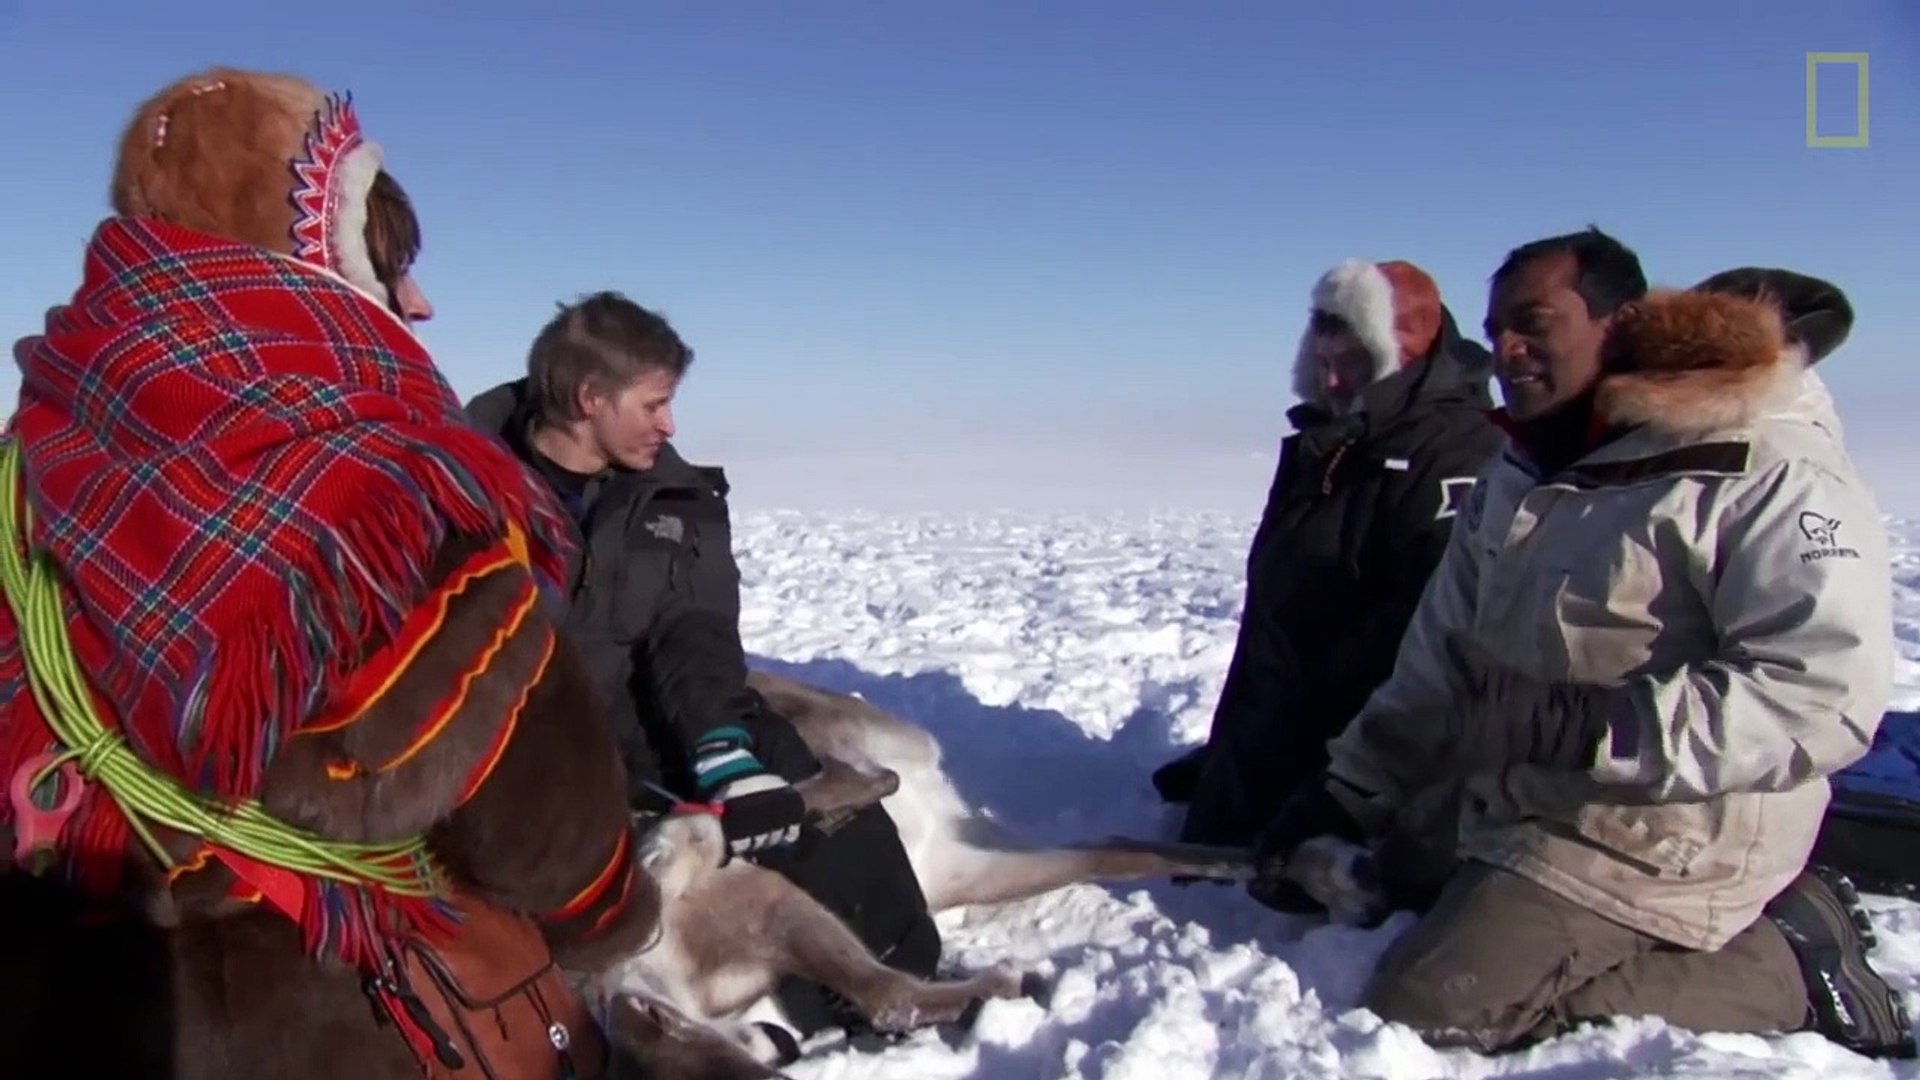 Man Castrates Reindeer With His Teeth